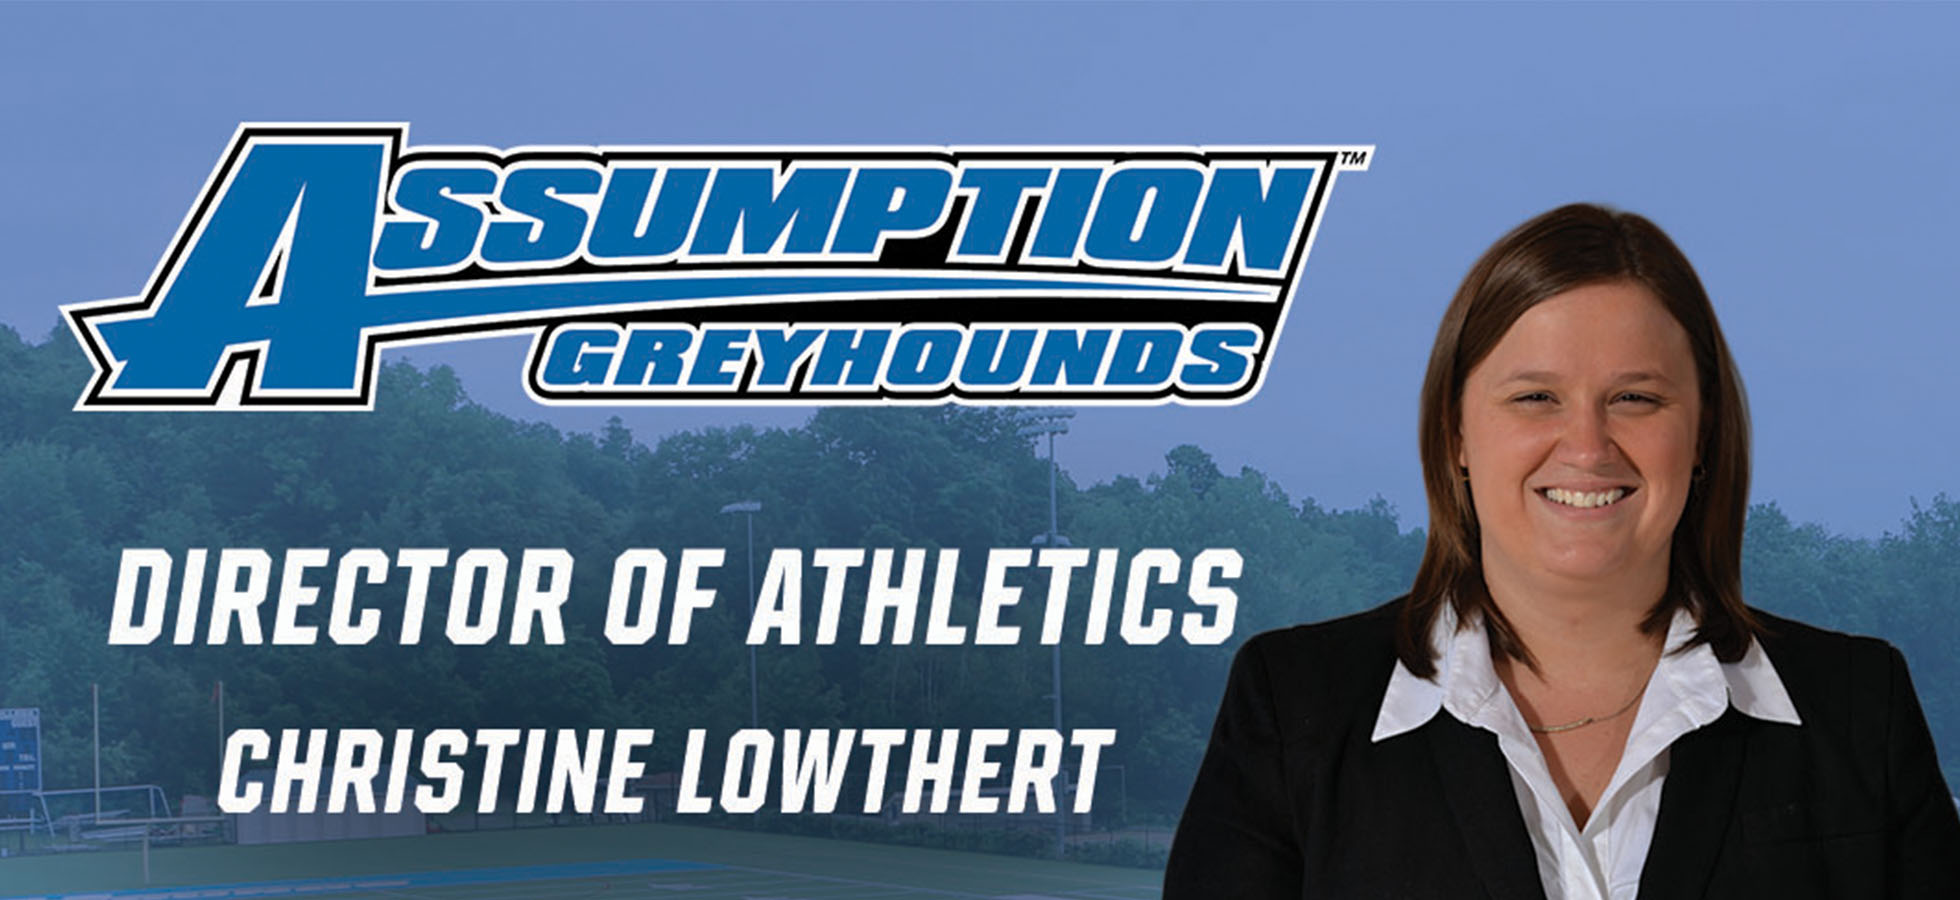 A graphic with the Assumption Athletic's logo announcing Christine Lowthert as the next Director of Athletics